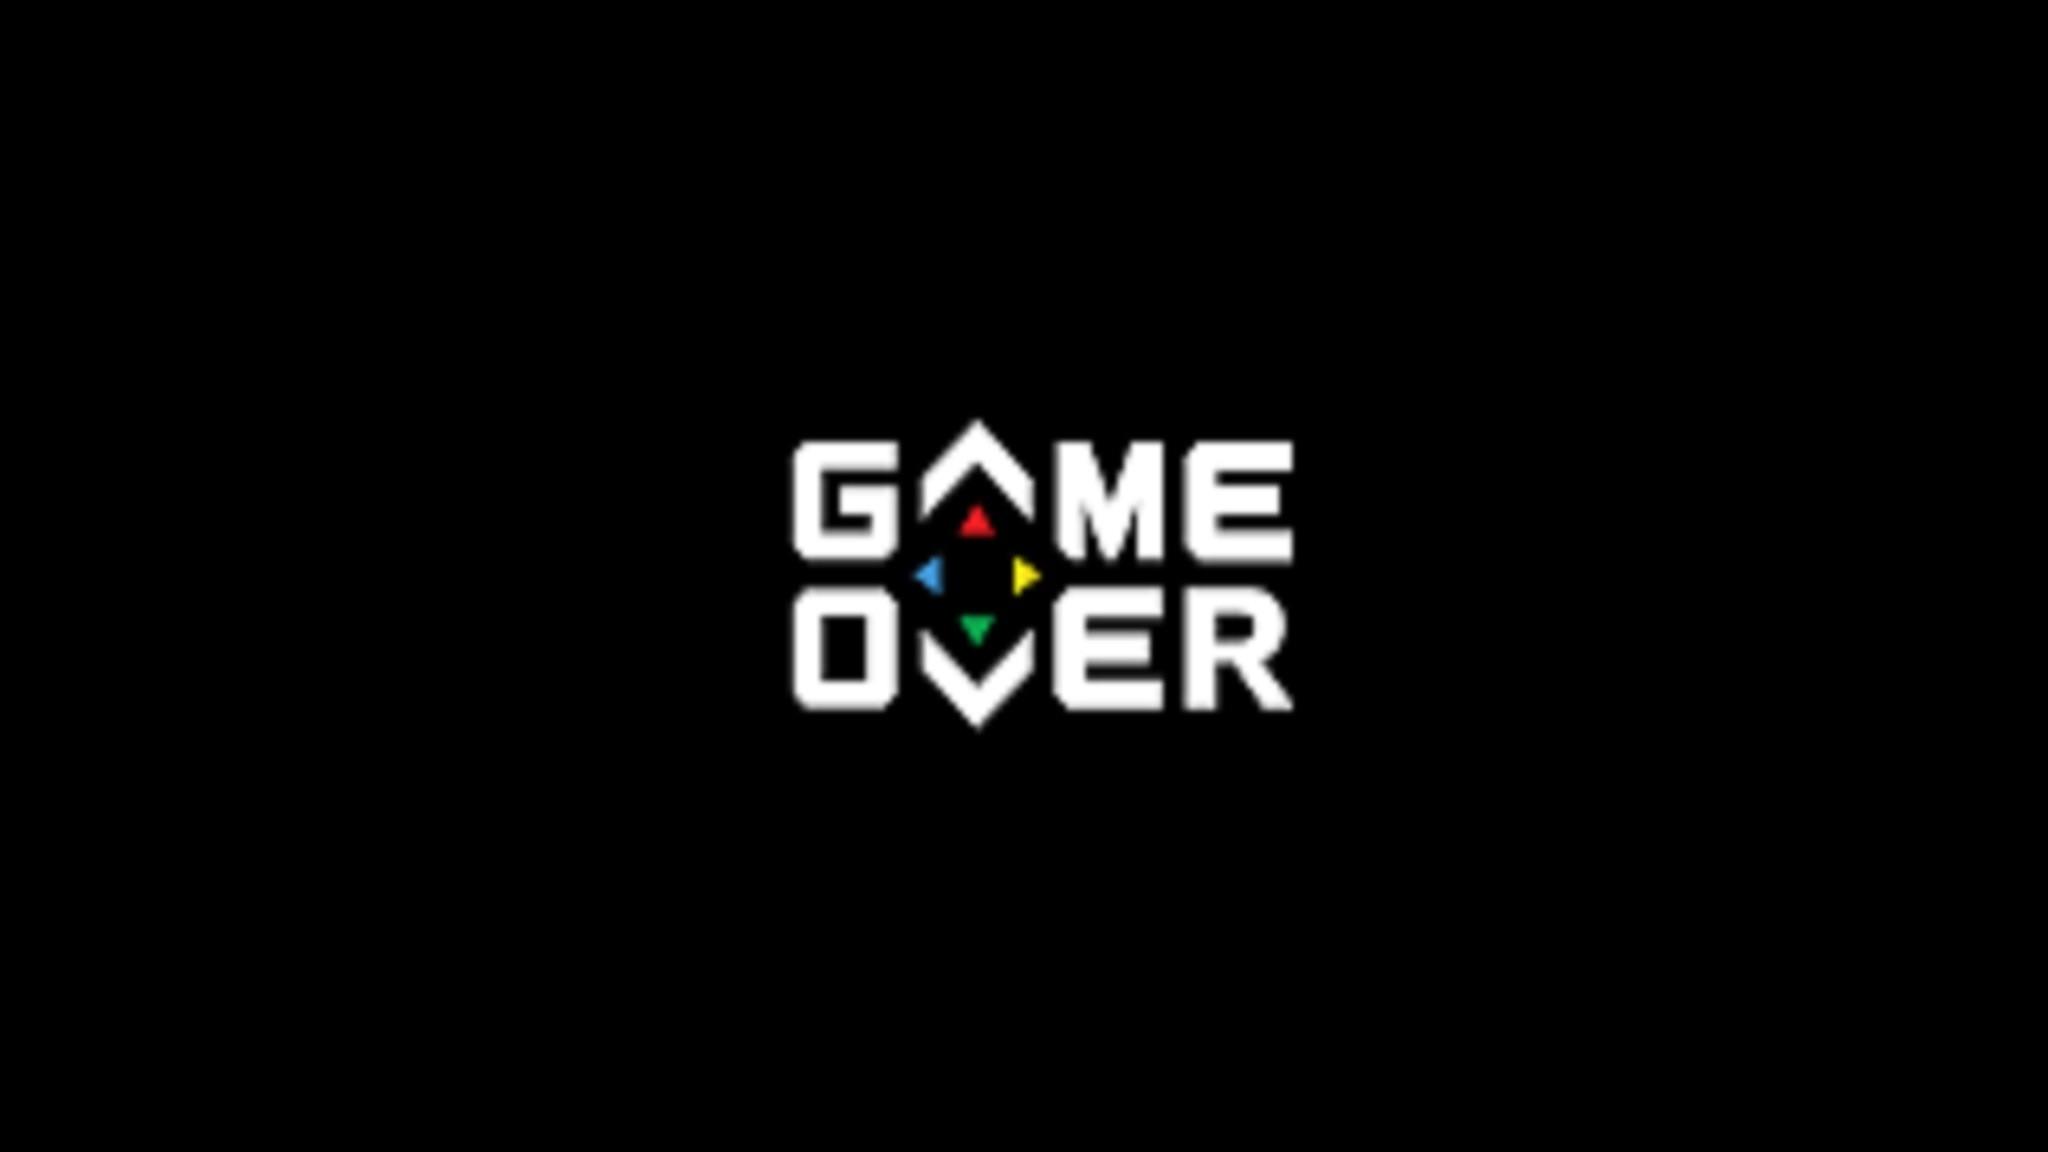 Game Over 4k Wallpapers - Wallpaper Cave